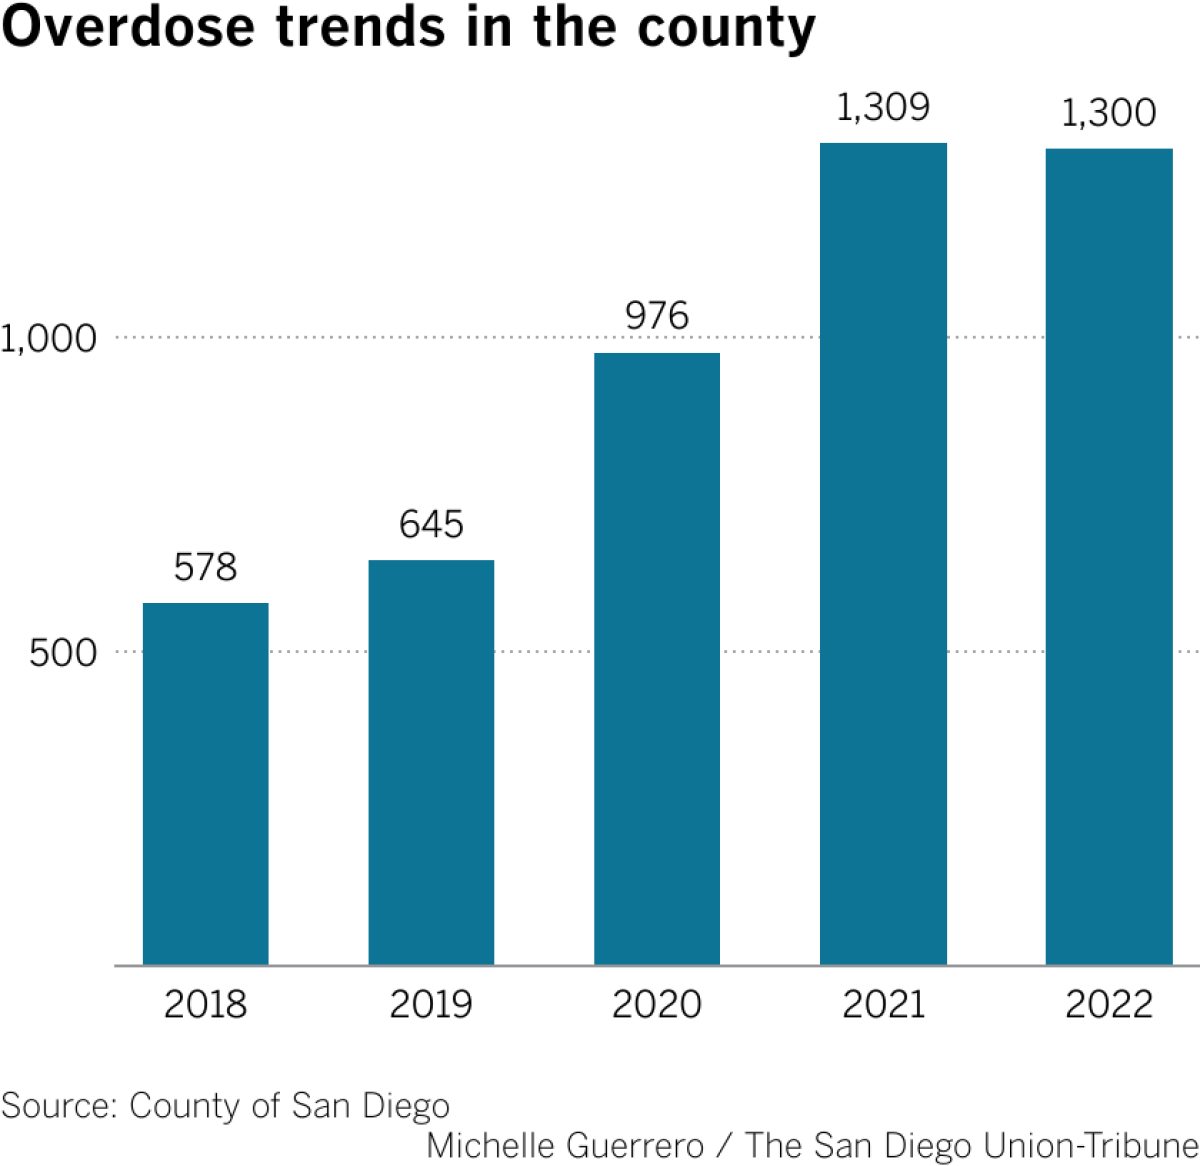  Overdose trends in the county 